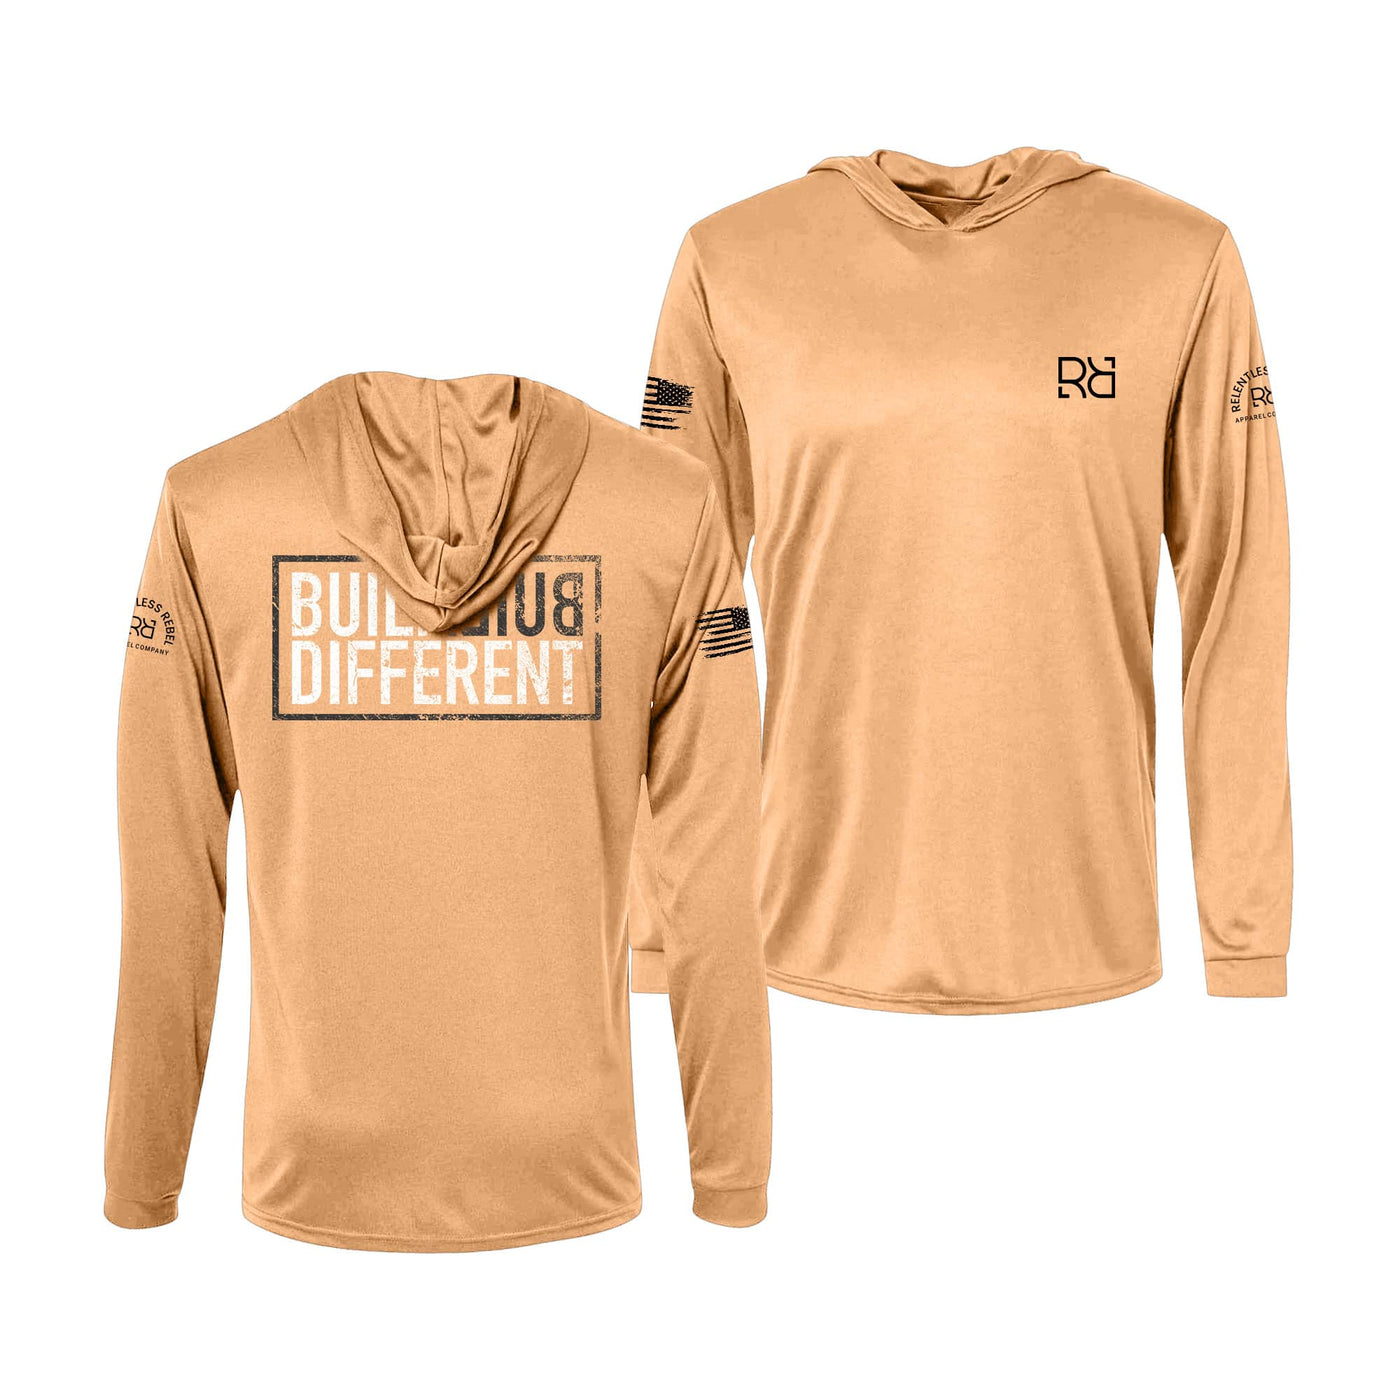 Built Different | Men's Dry Fit Hooded Long Sleeve | UPF50 Coral